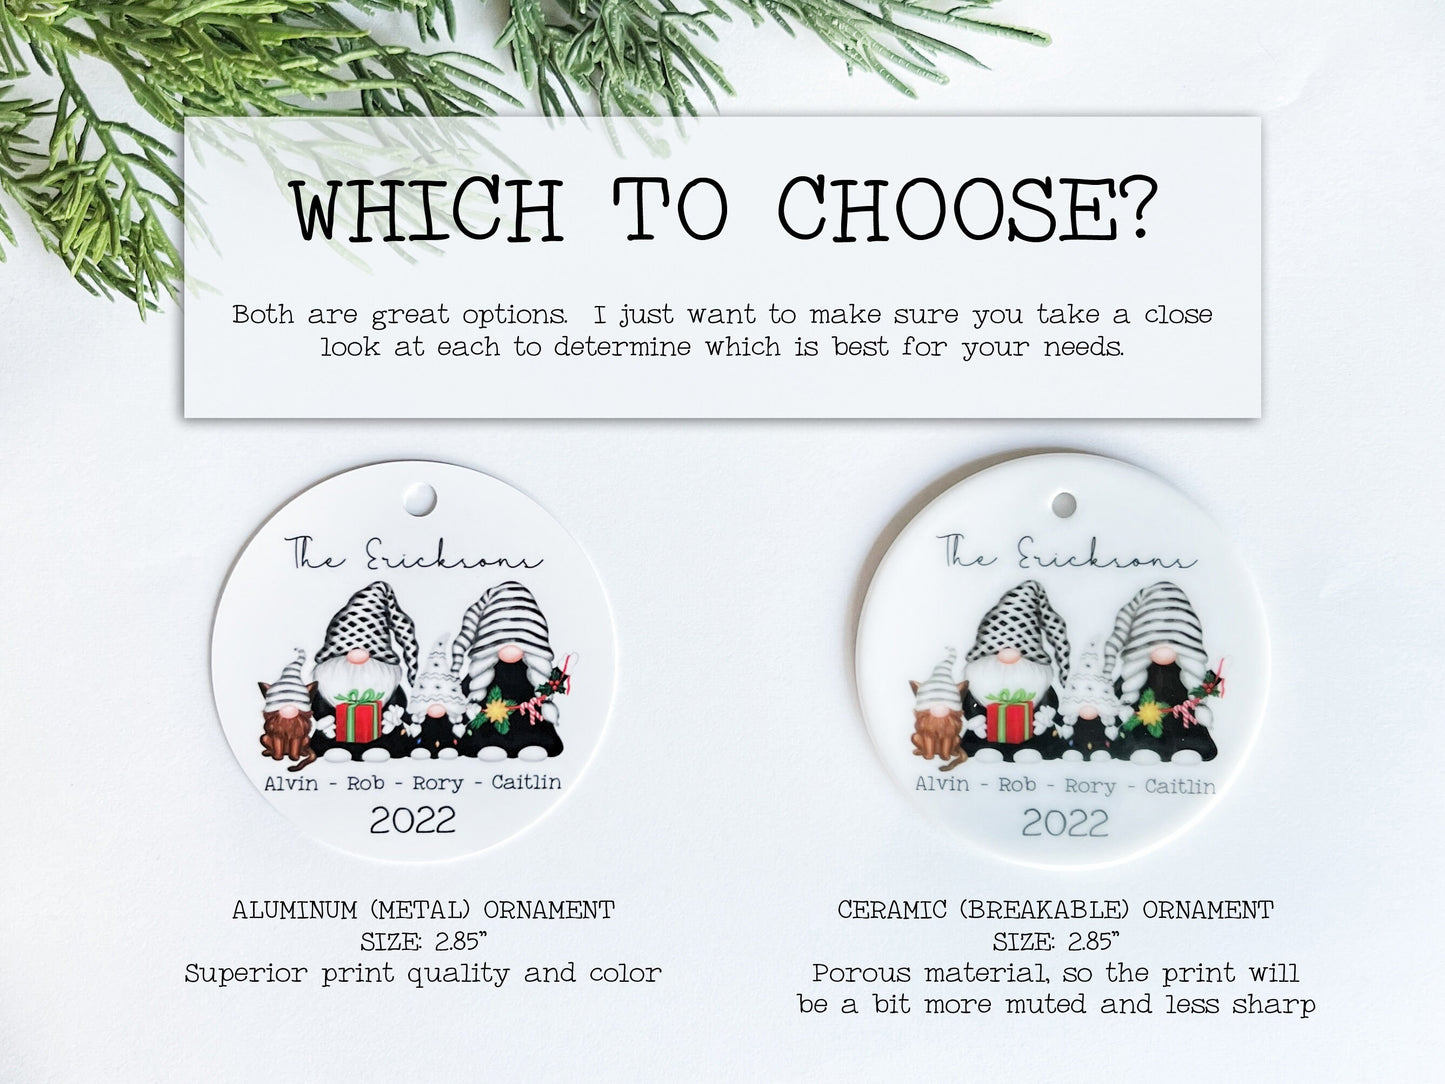 Family of Gnomes Ornament with Pet, Personalized Family Christmas Ornament 2022, Family ornament with Dog or Cat